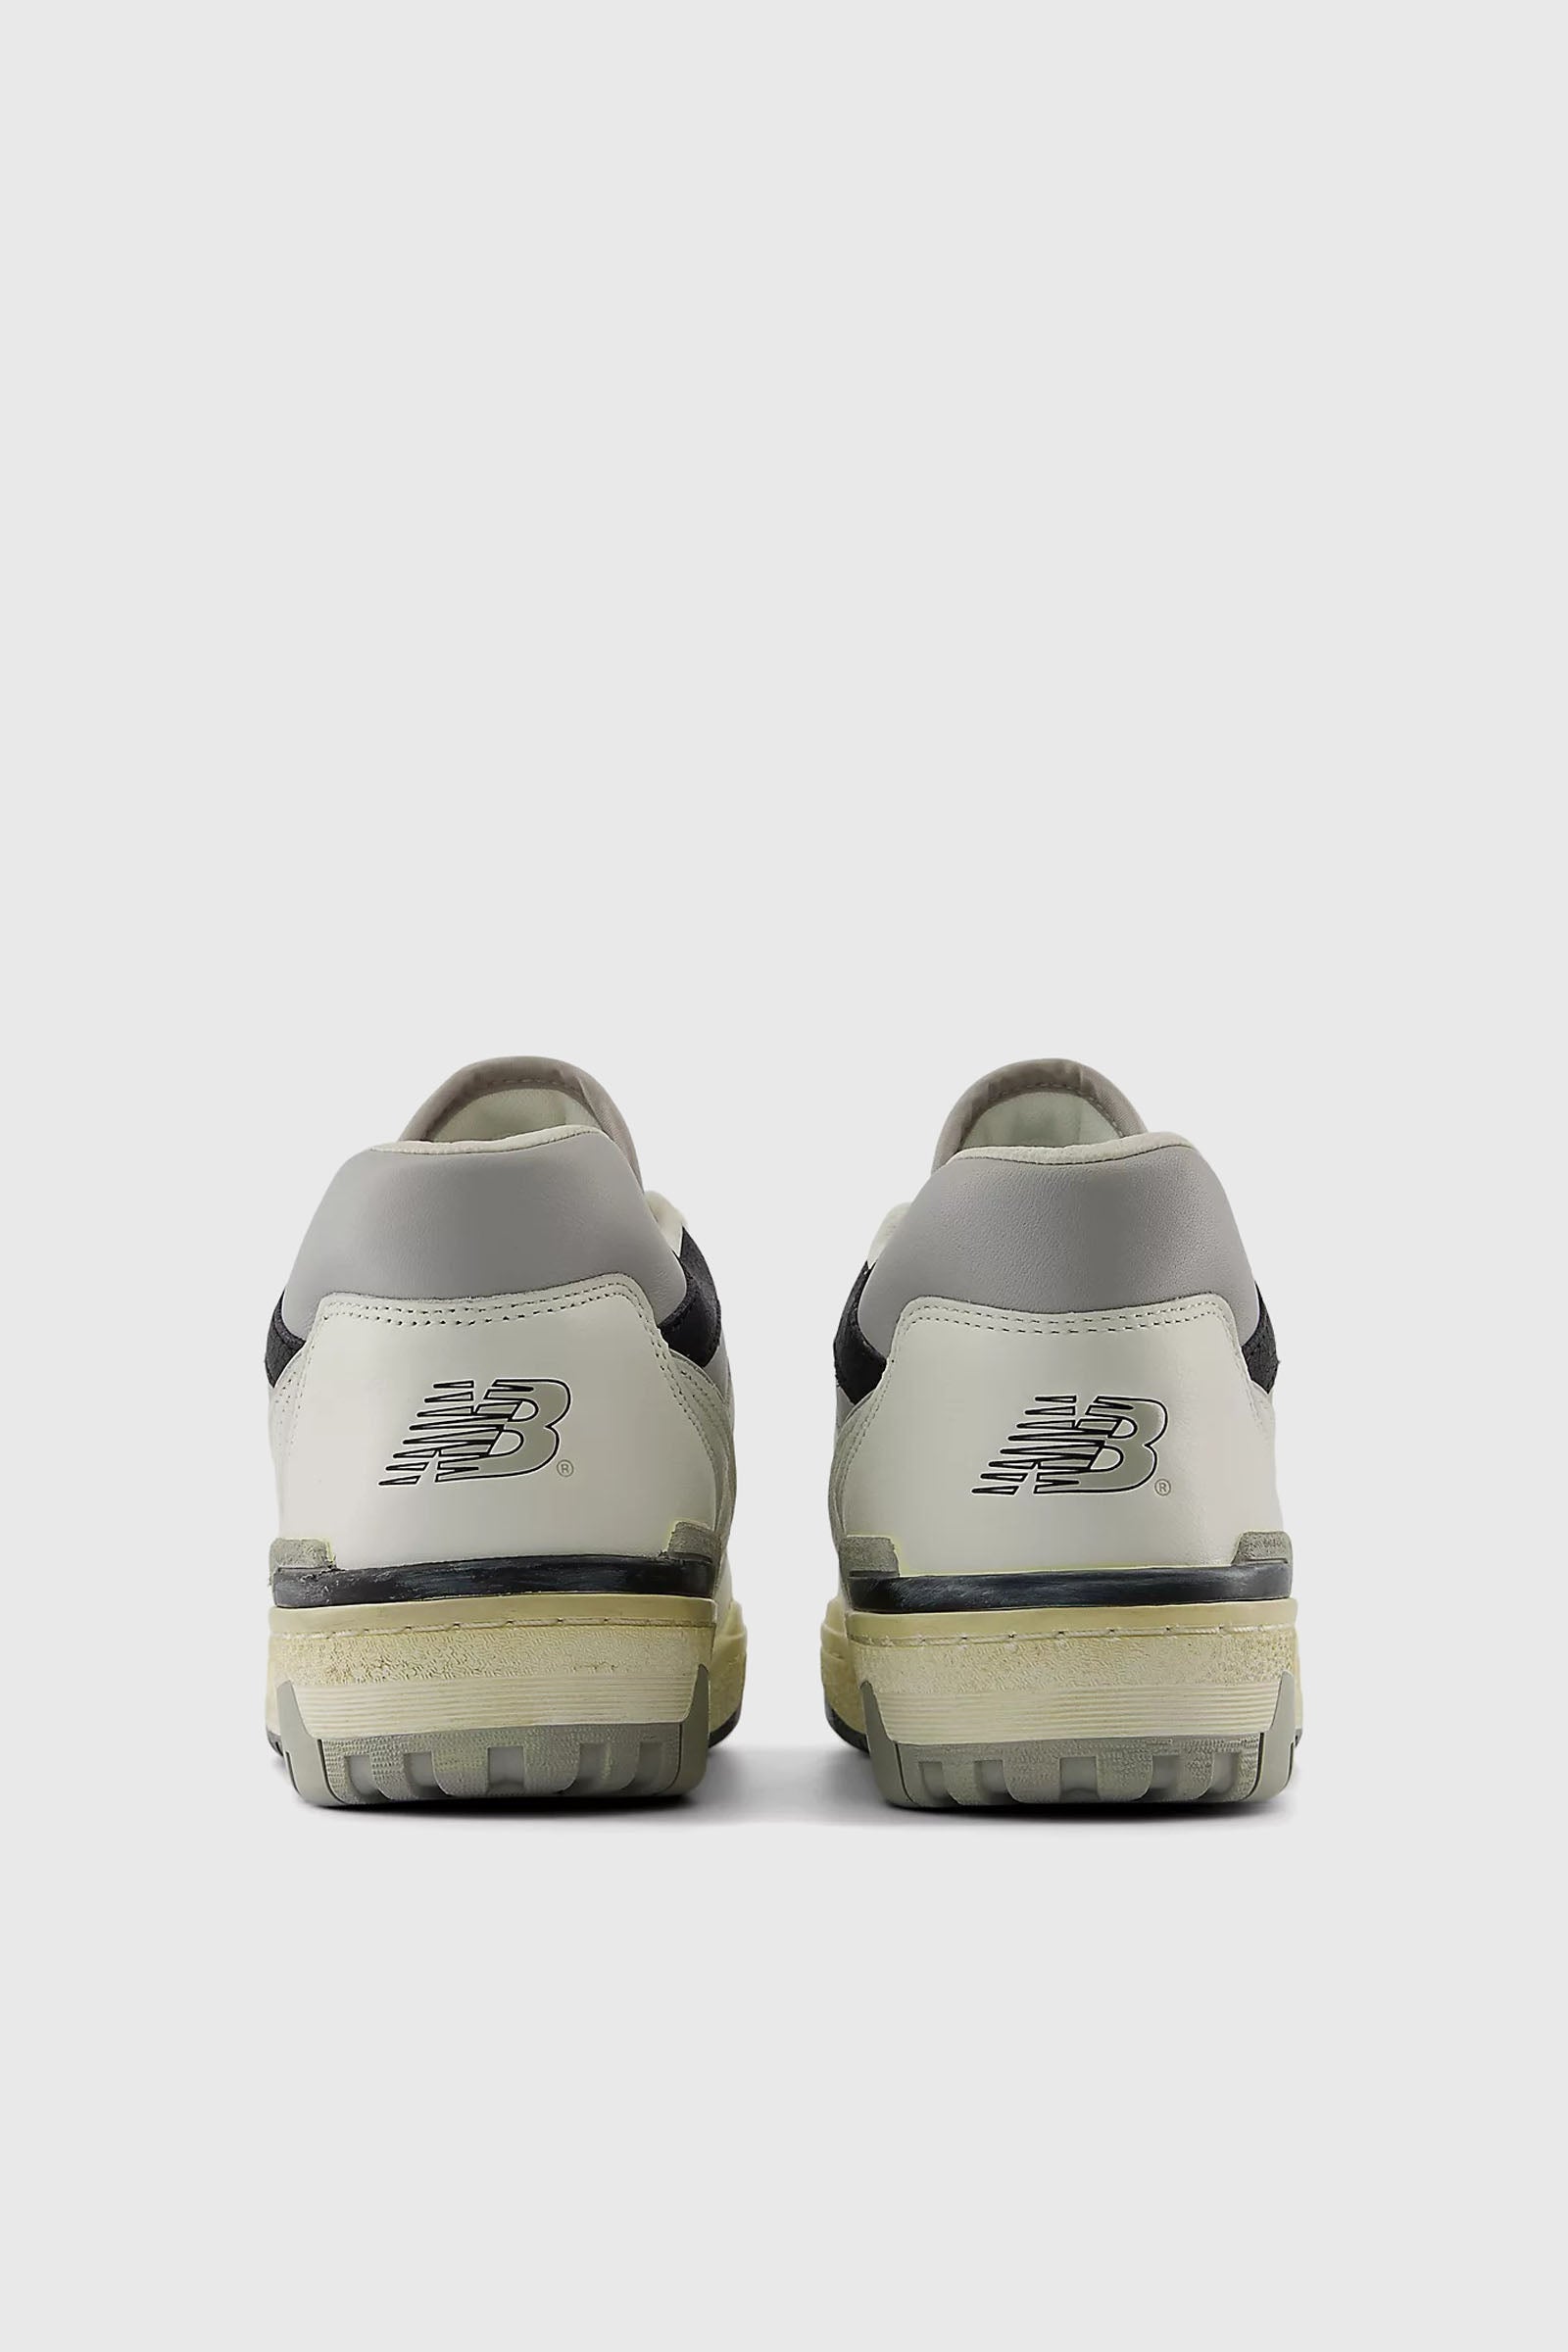 H1 Title: New Balance Sneakers 550 Synthetic White/Grey - 3